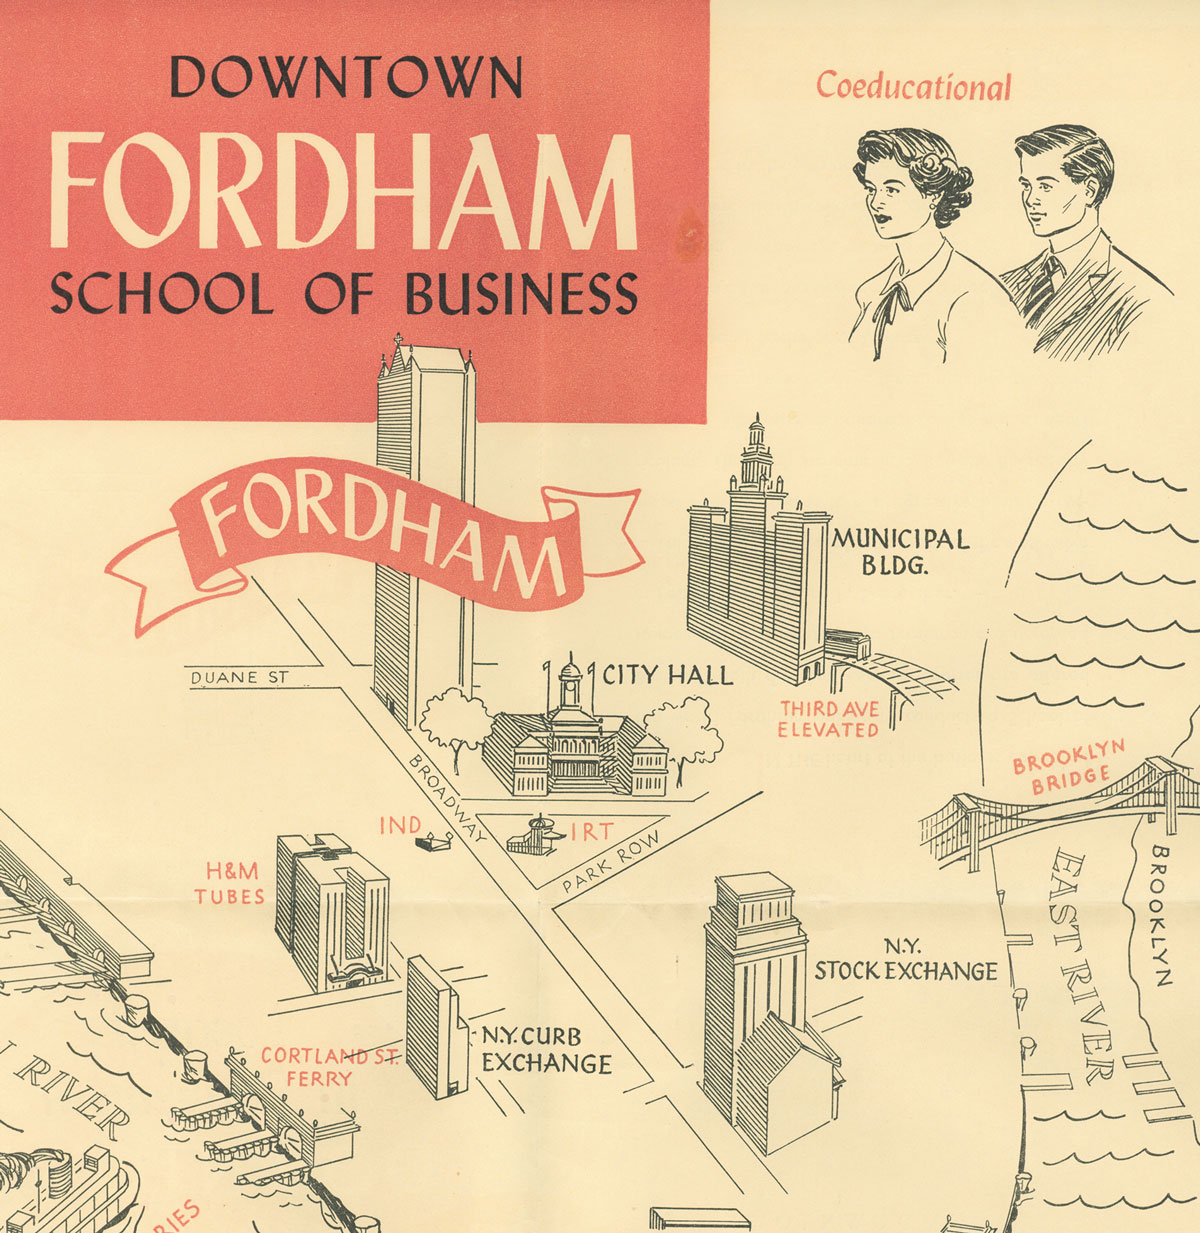 6. Downtown Fordham School of Business